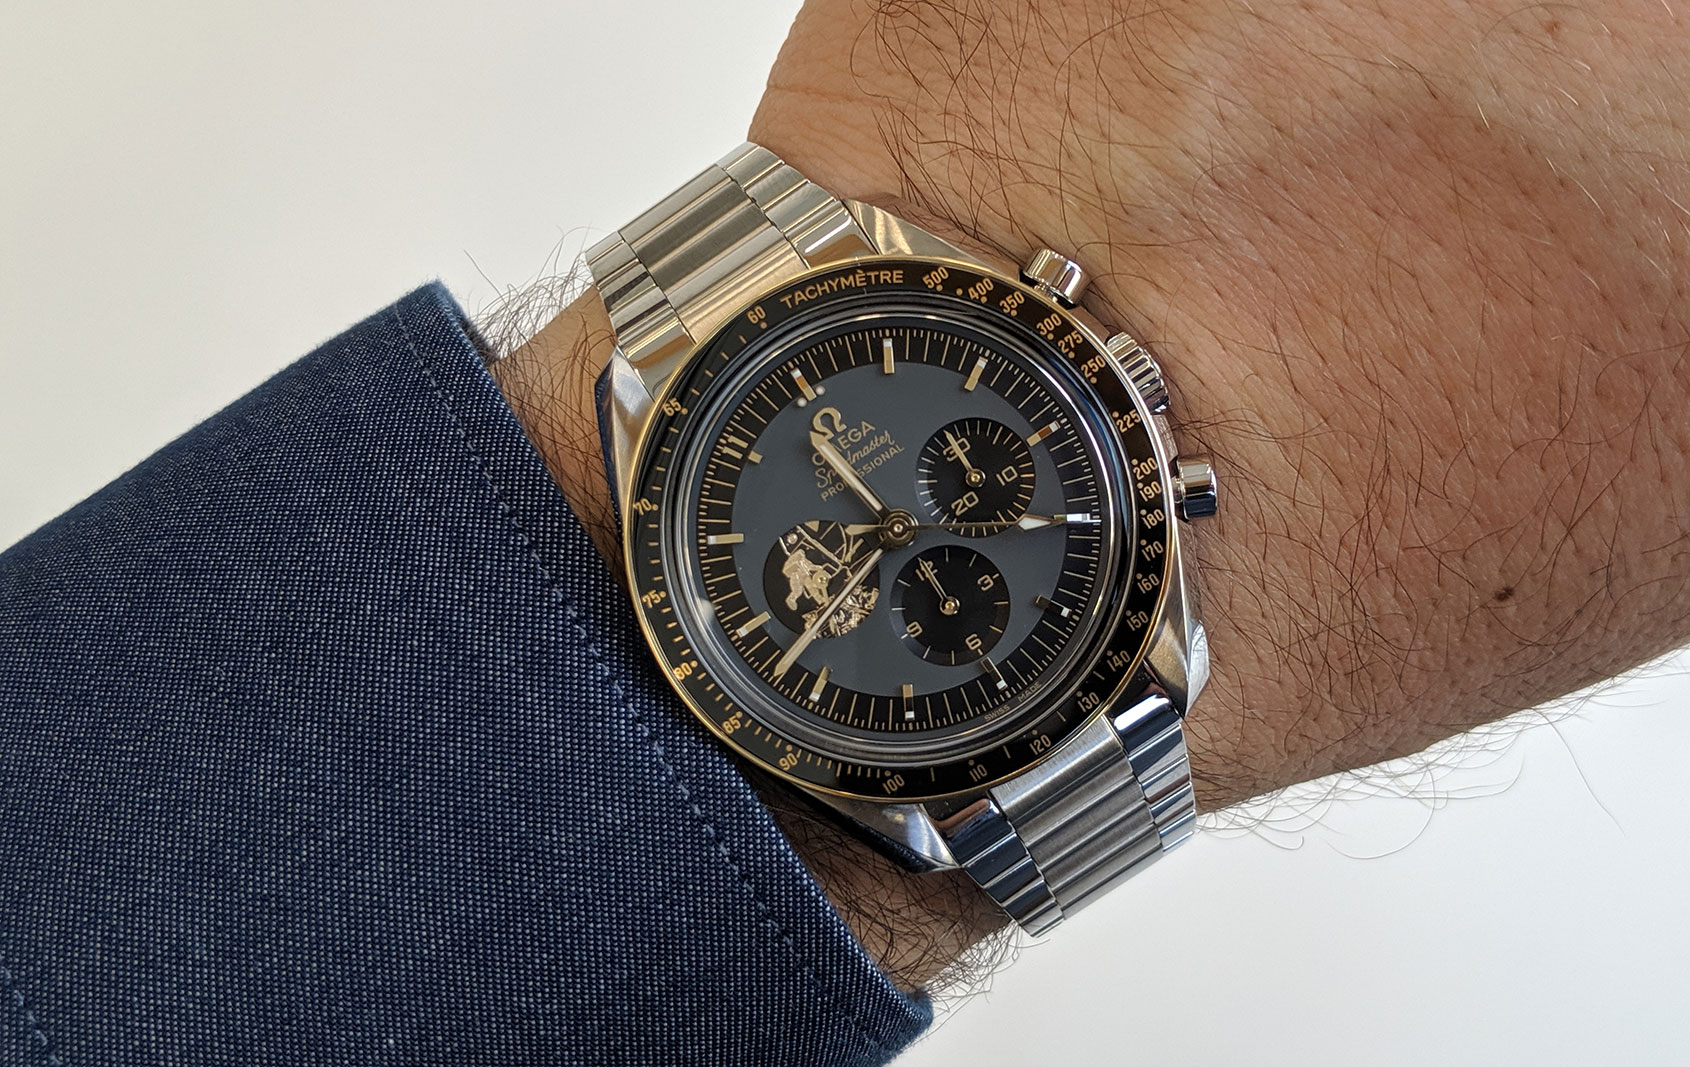 omega limited edition